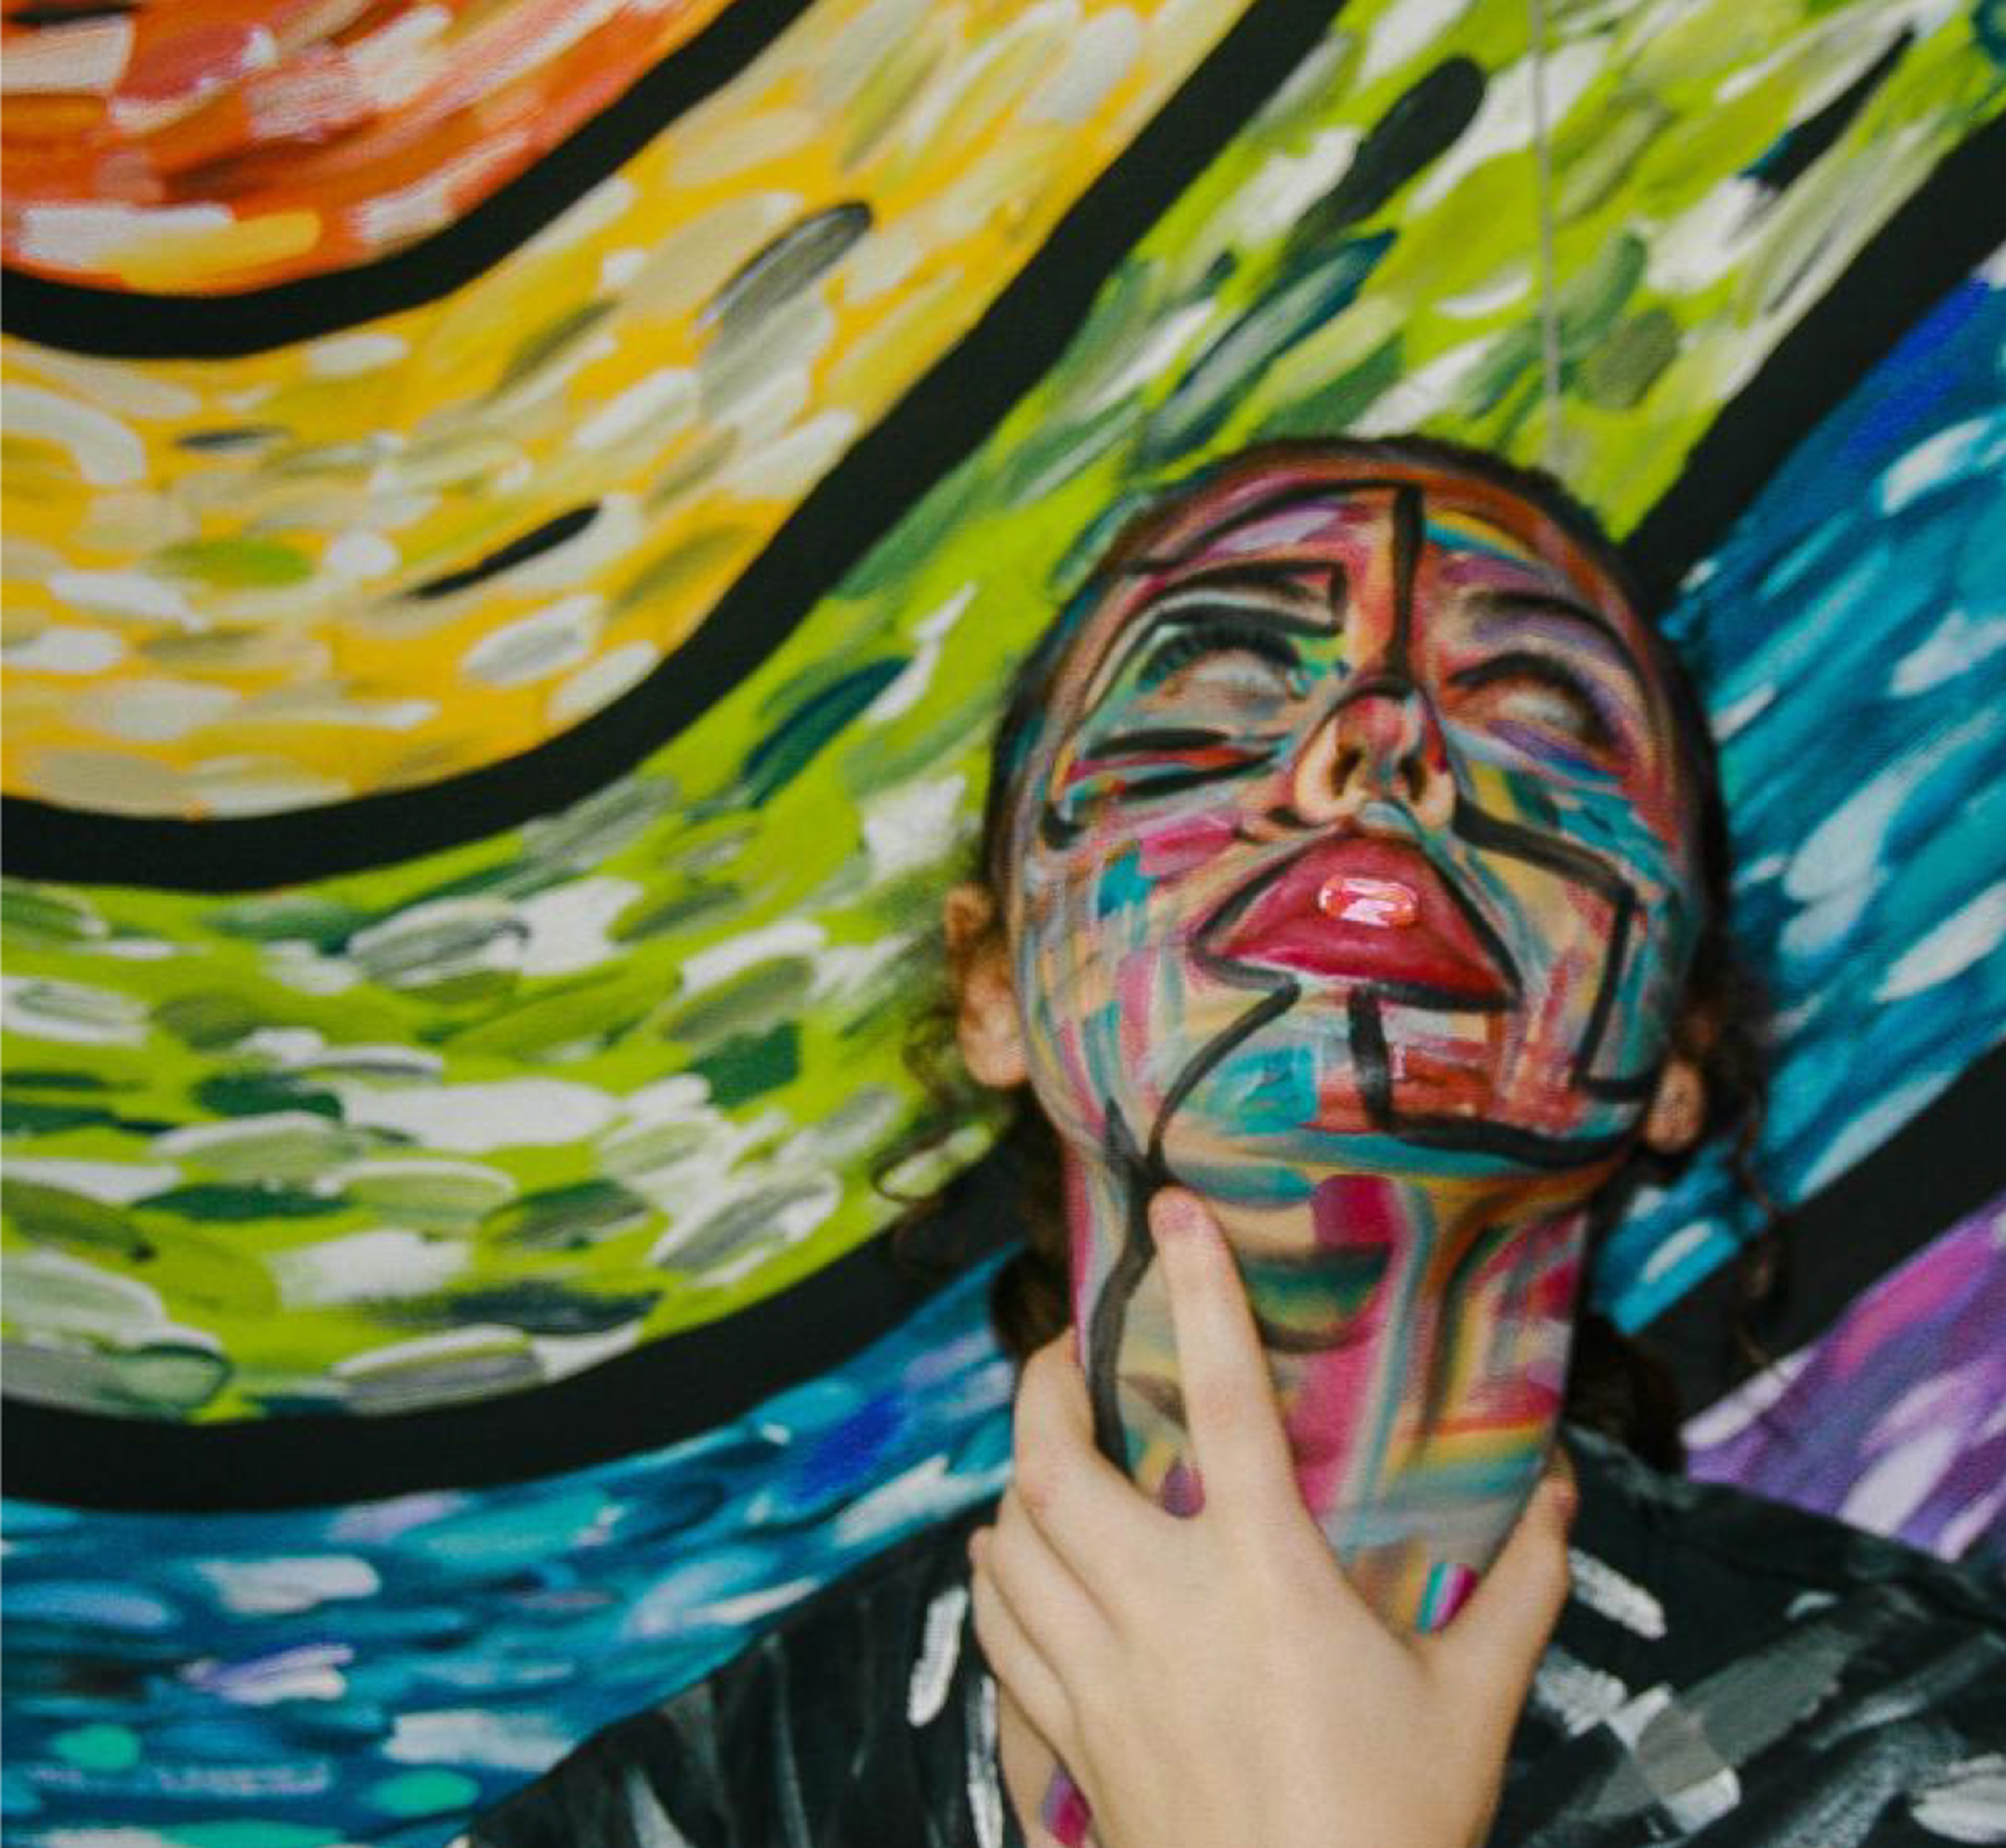 Image of a young woman with paint on her face, looking up and clutch her throat, against a Van Gogh like background in red, yellow, green, blue, and purple arcs